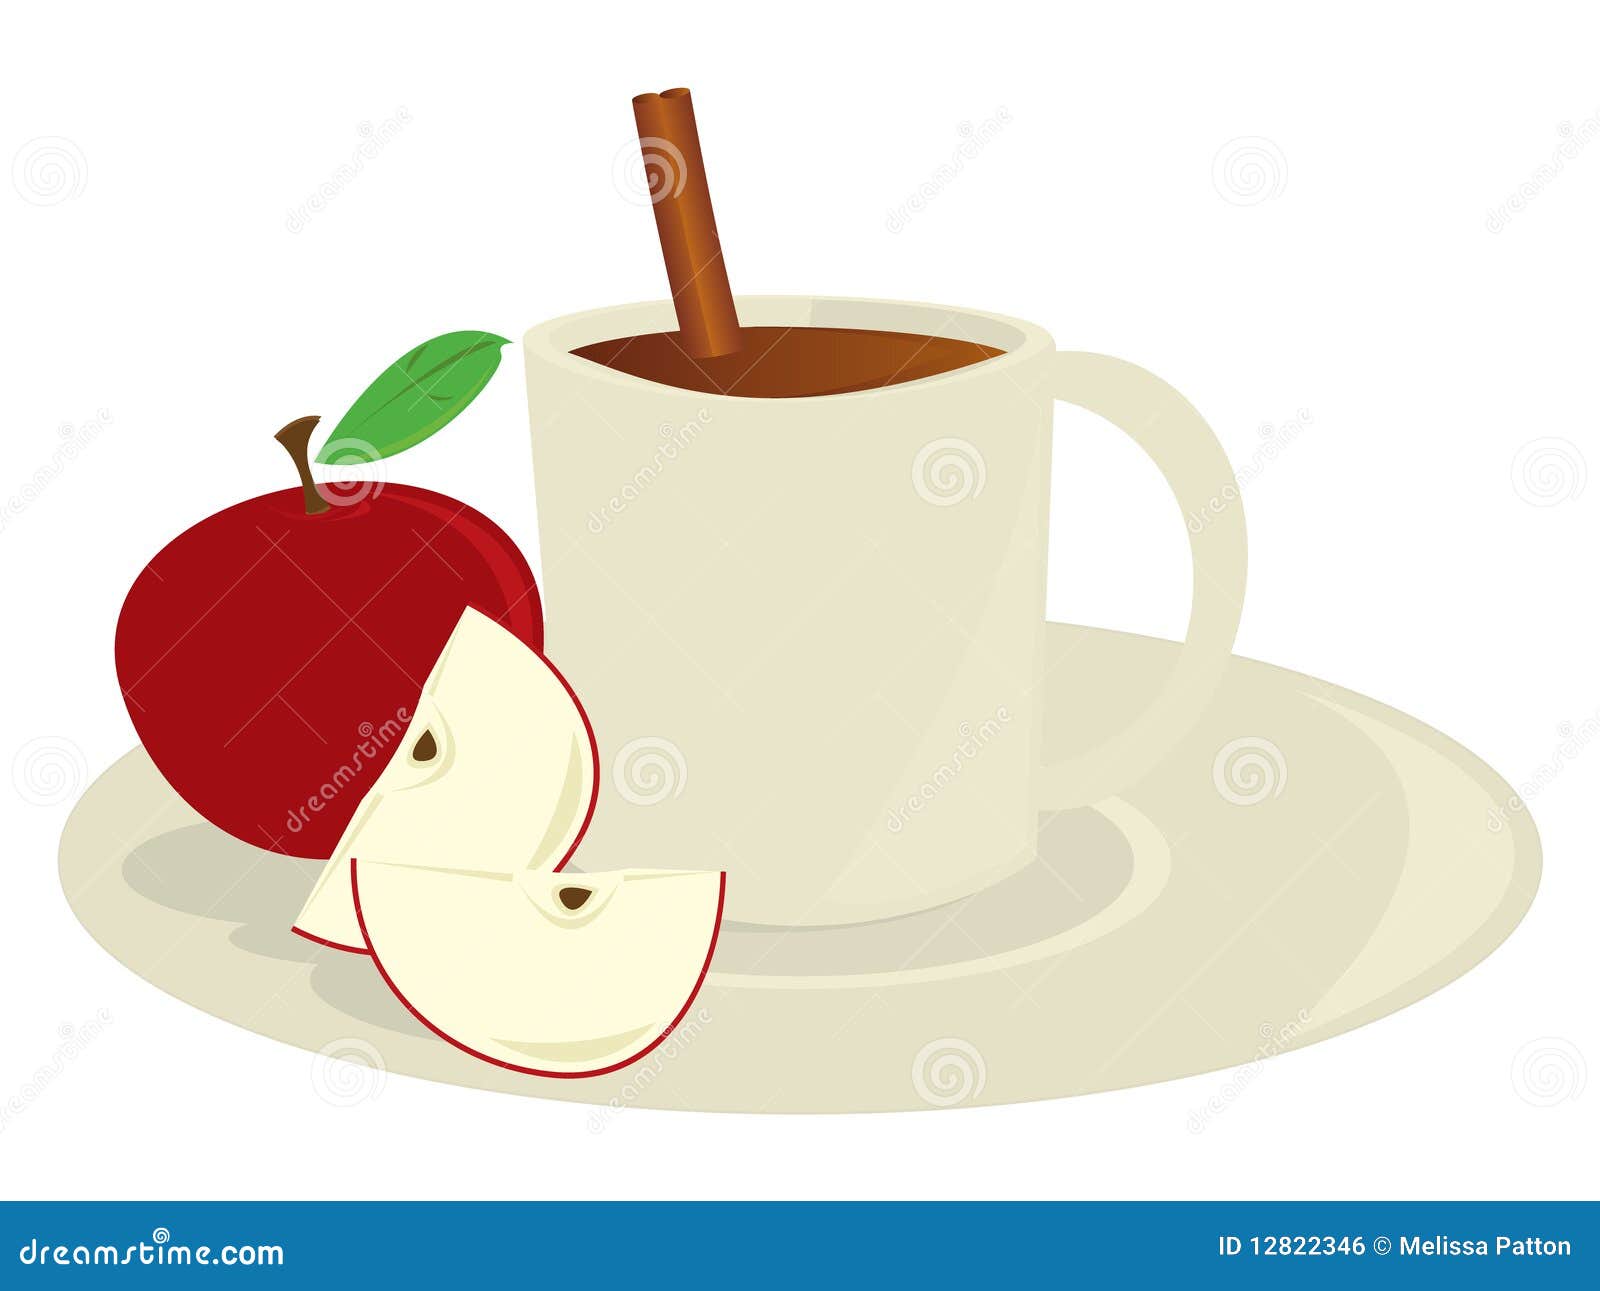 free apple cider clipart - photo #5